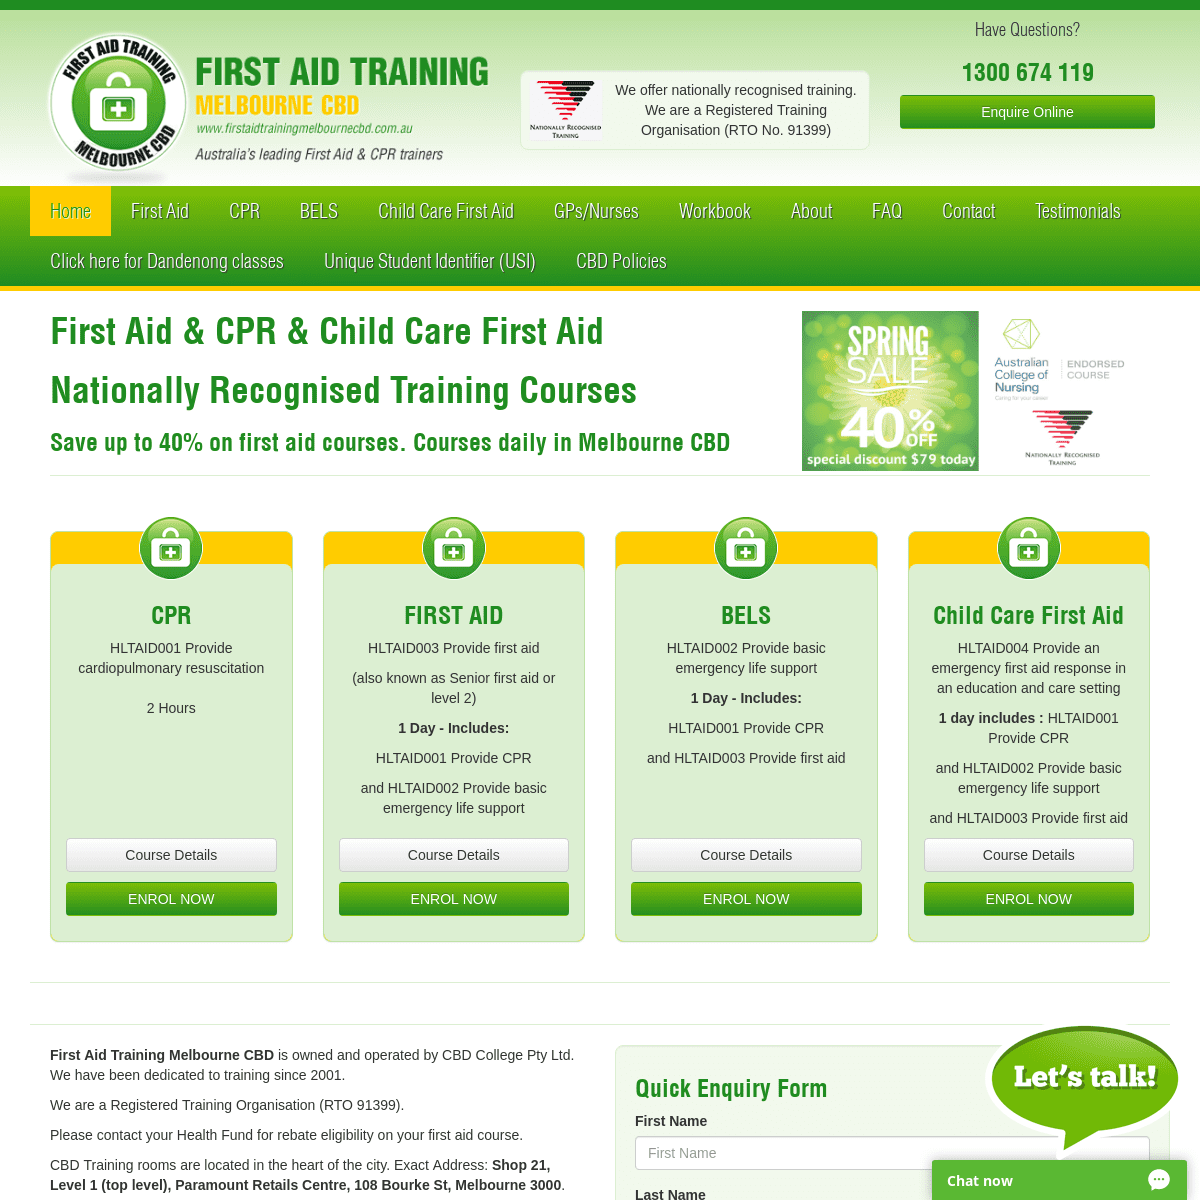 CBD College : First Aid Training Melbourne | CPR First Aid Course